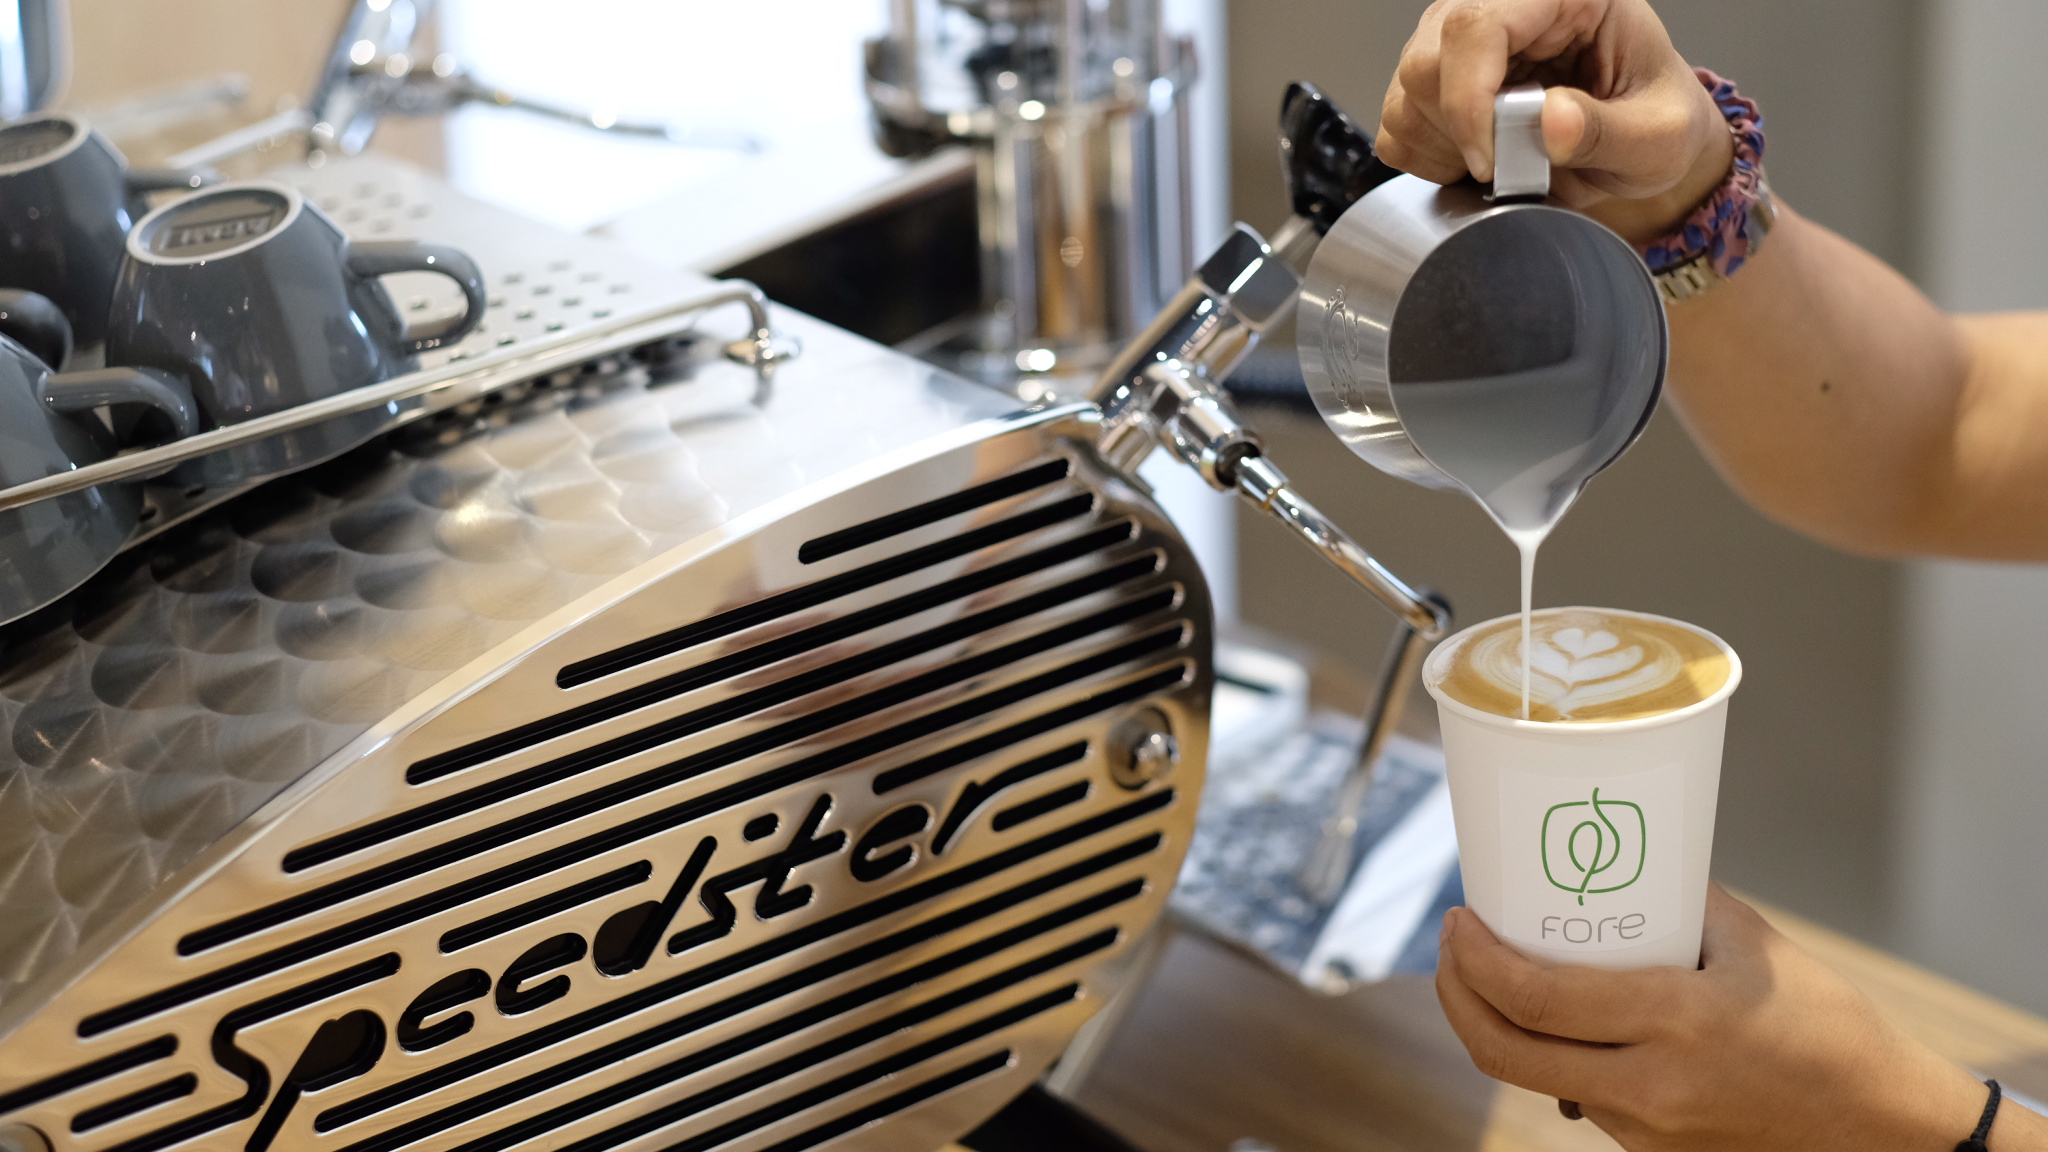 Fore Coffee announced US$8.5 million funding and is challenged by a new competitor